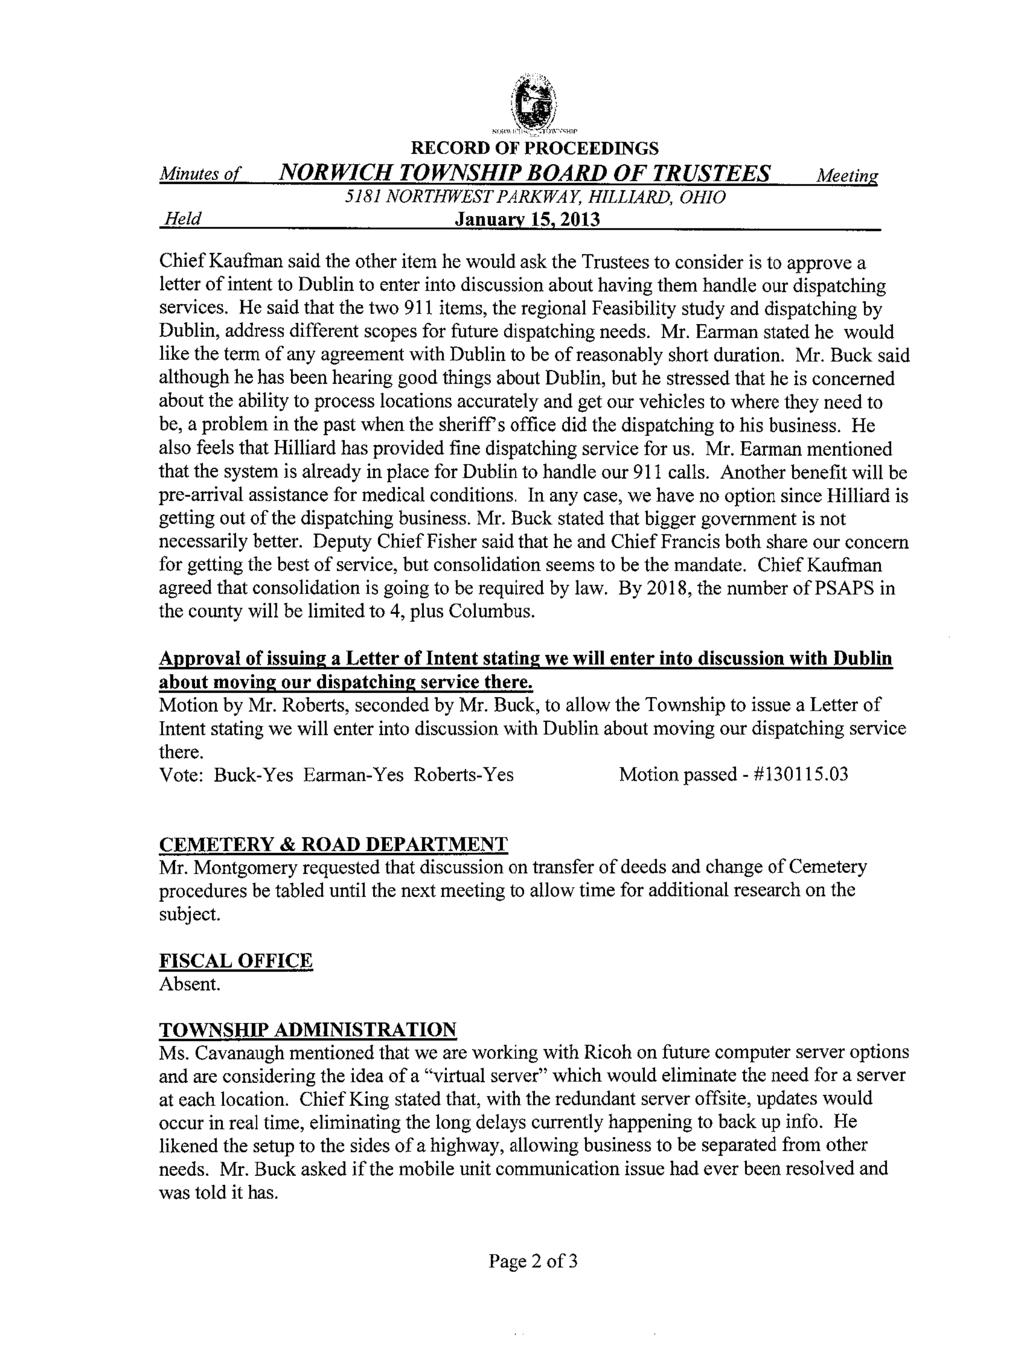 Minutes of NORWICH TOWNSHIP BOARD OF TRUSTEES 5181 NORTHWEST PARKWA Y, HILLIARD, OHIO Meeting, Held Januar~ 15, 2013 Chief Kaufman said the other item he would ask the Trustees to consider is to